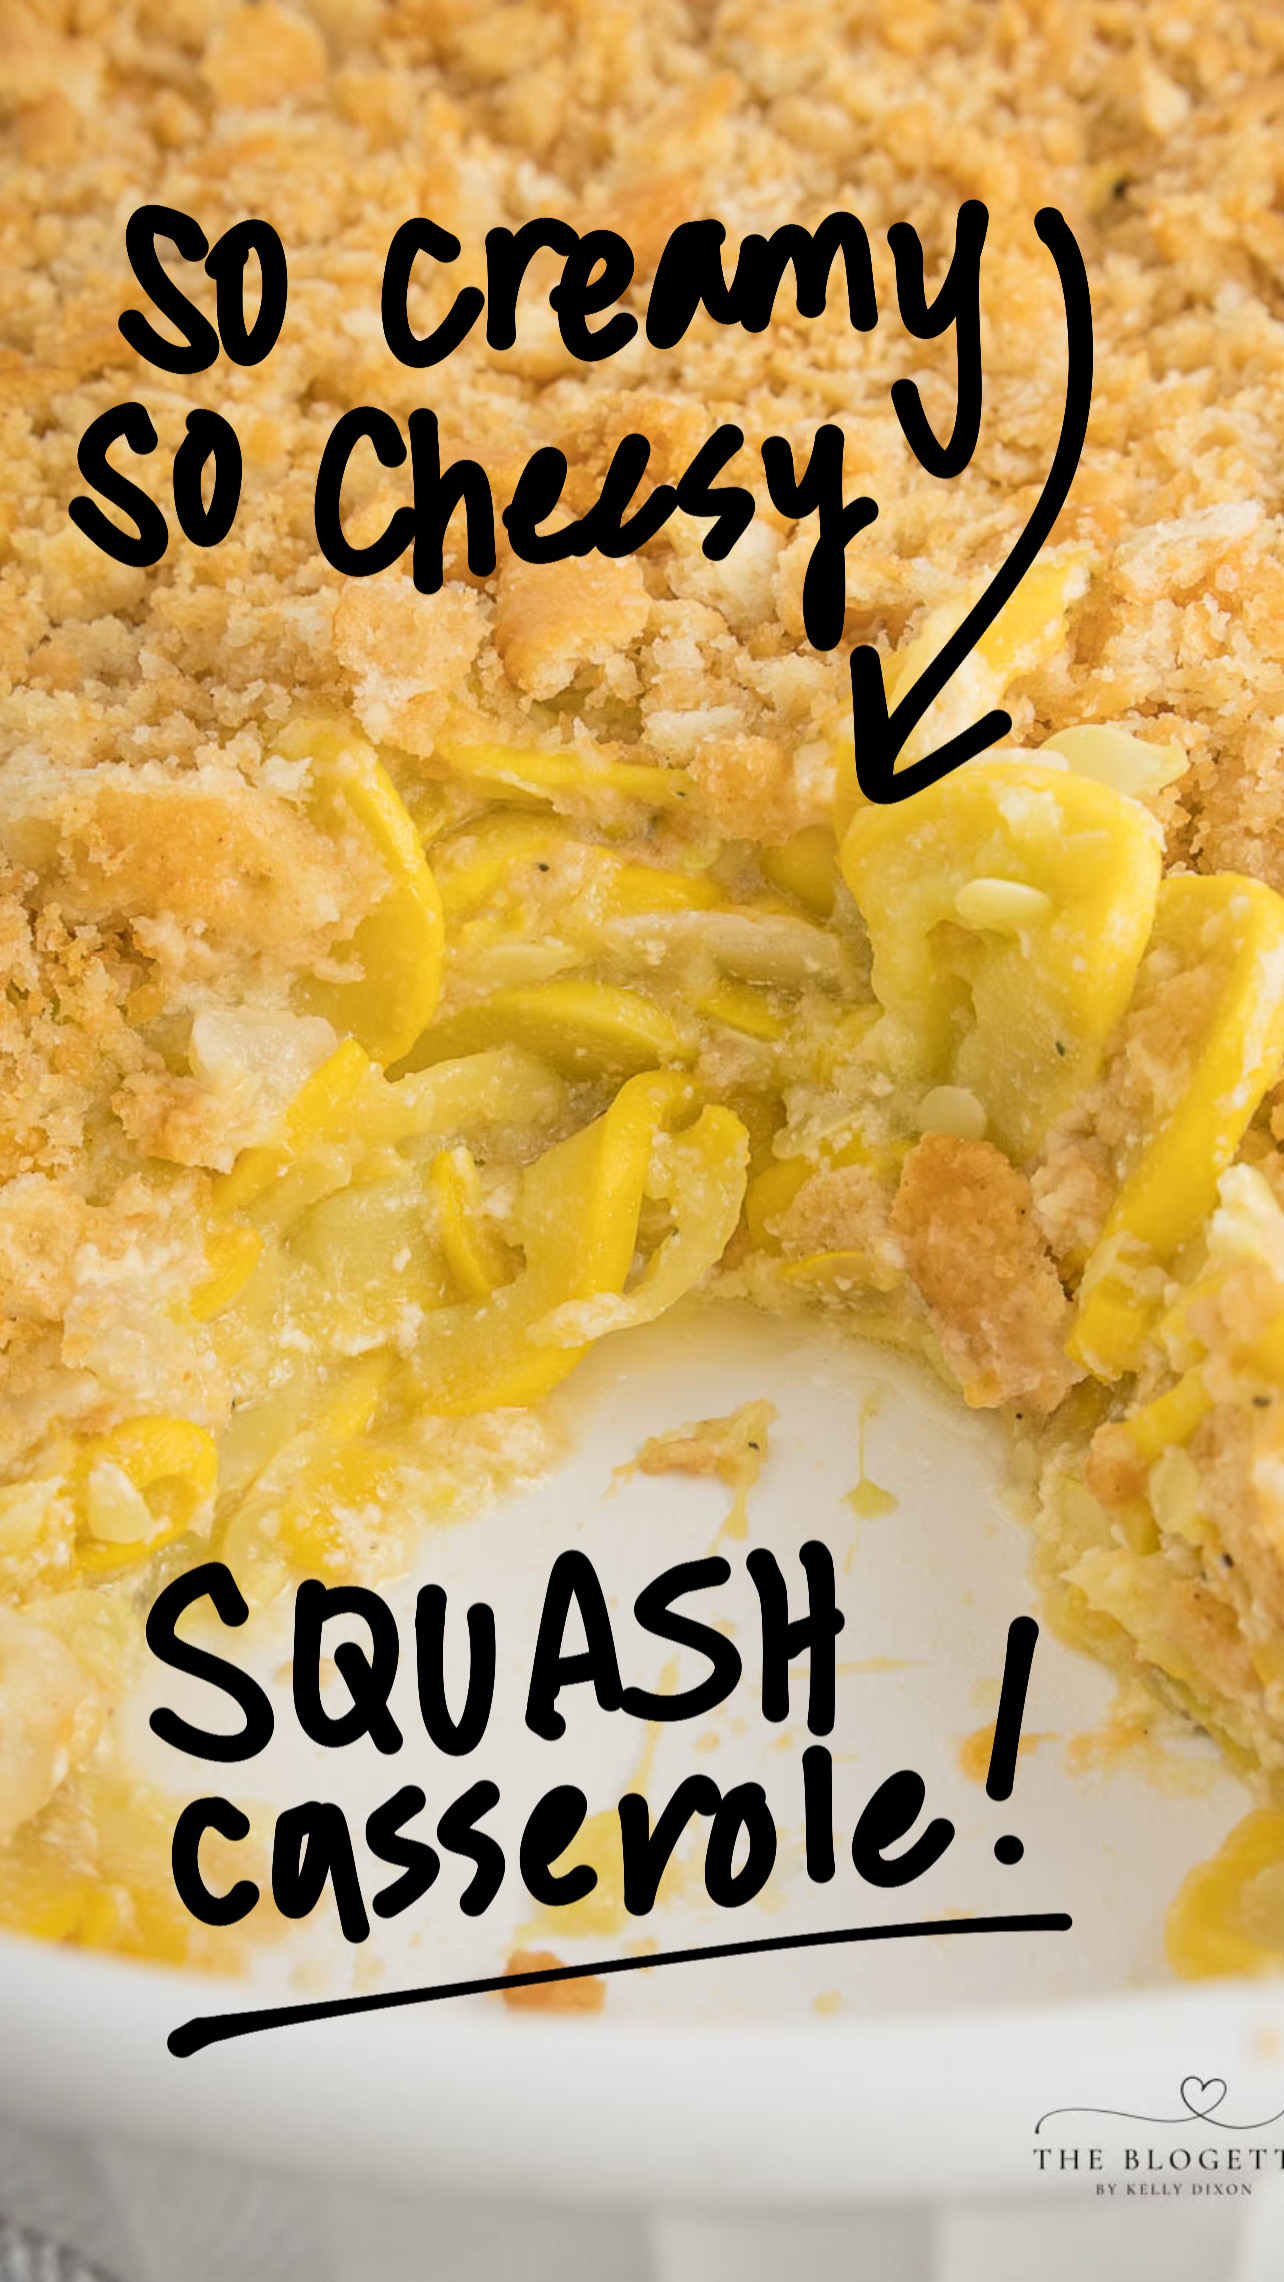 This yellow squash casserole is both comforting and indulgent. Rich, creamy layers of tender, sliced yellow squash are topped by golden, buttery crackers.